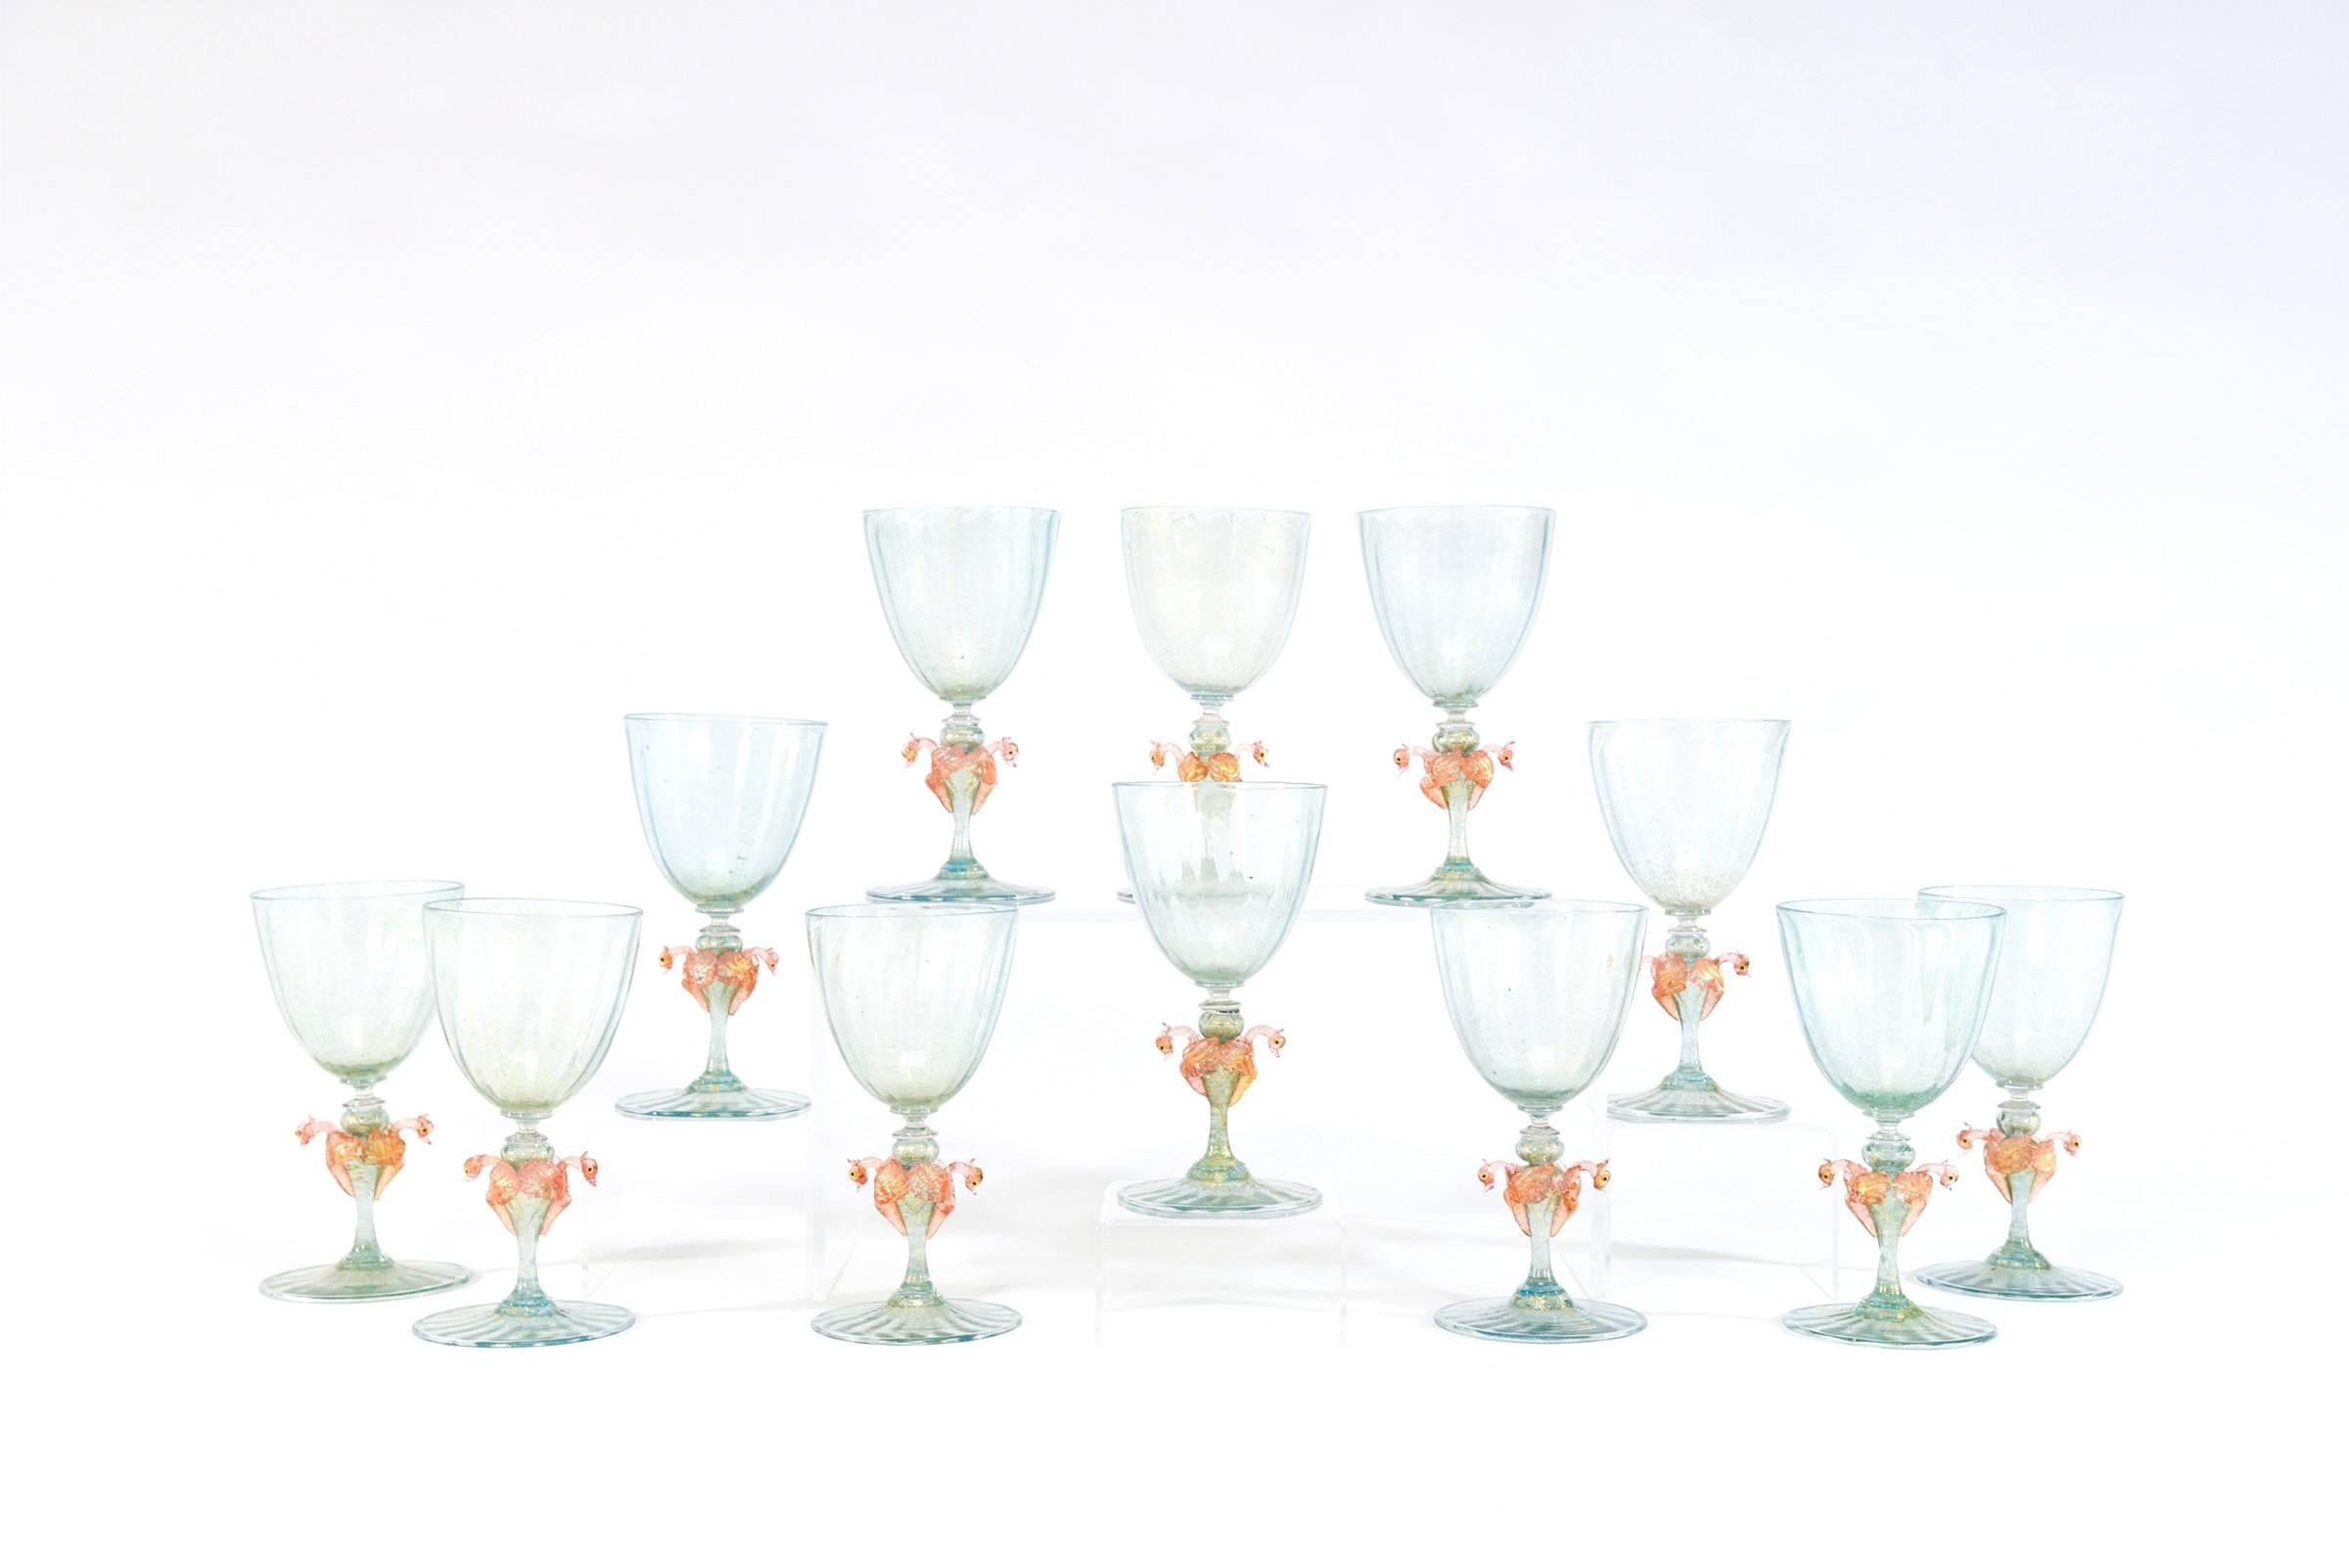 This is an amazing set of 12 handblown Venetian goblets with gold leaf inclusions and optic ribbing made in an unusual color combination. They are green with shades of blue to create aqua. The size is perfect to use as both wines and water goblets